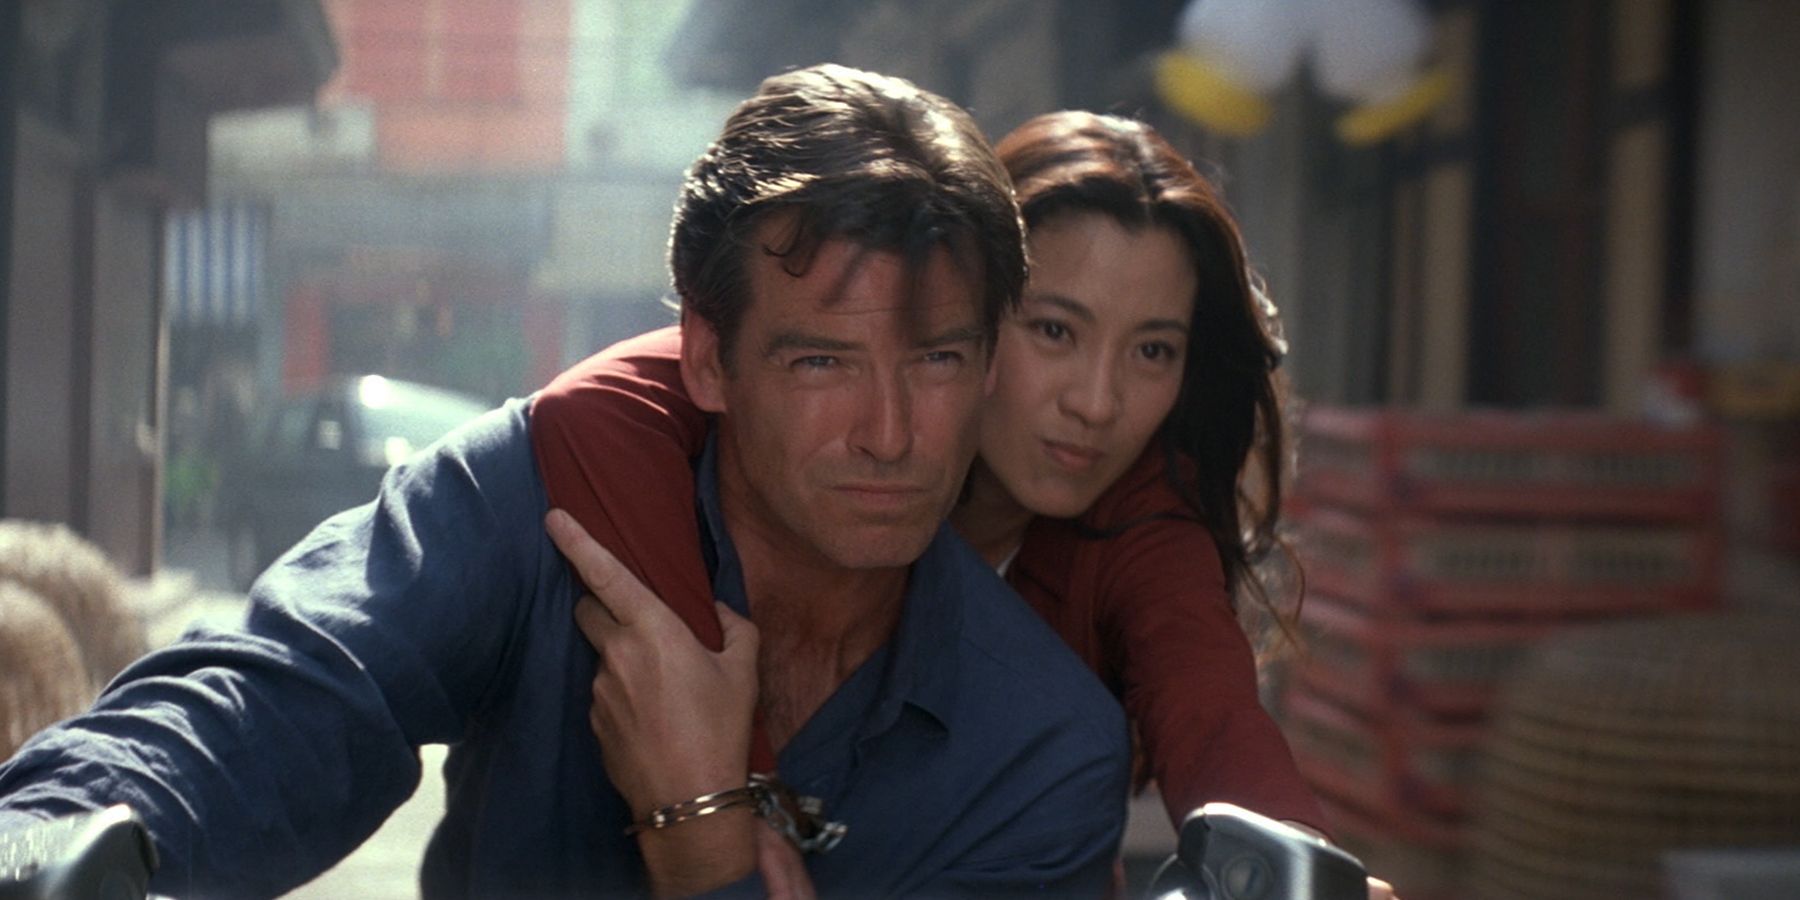 James Bond and Wai Lin ride the same motorbike while handcuffed in Tomorrow Never Dies.